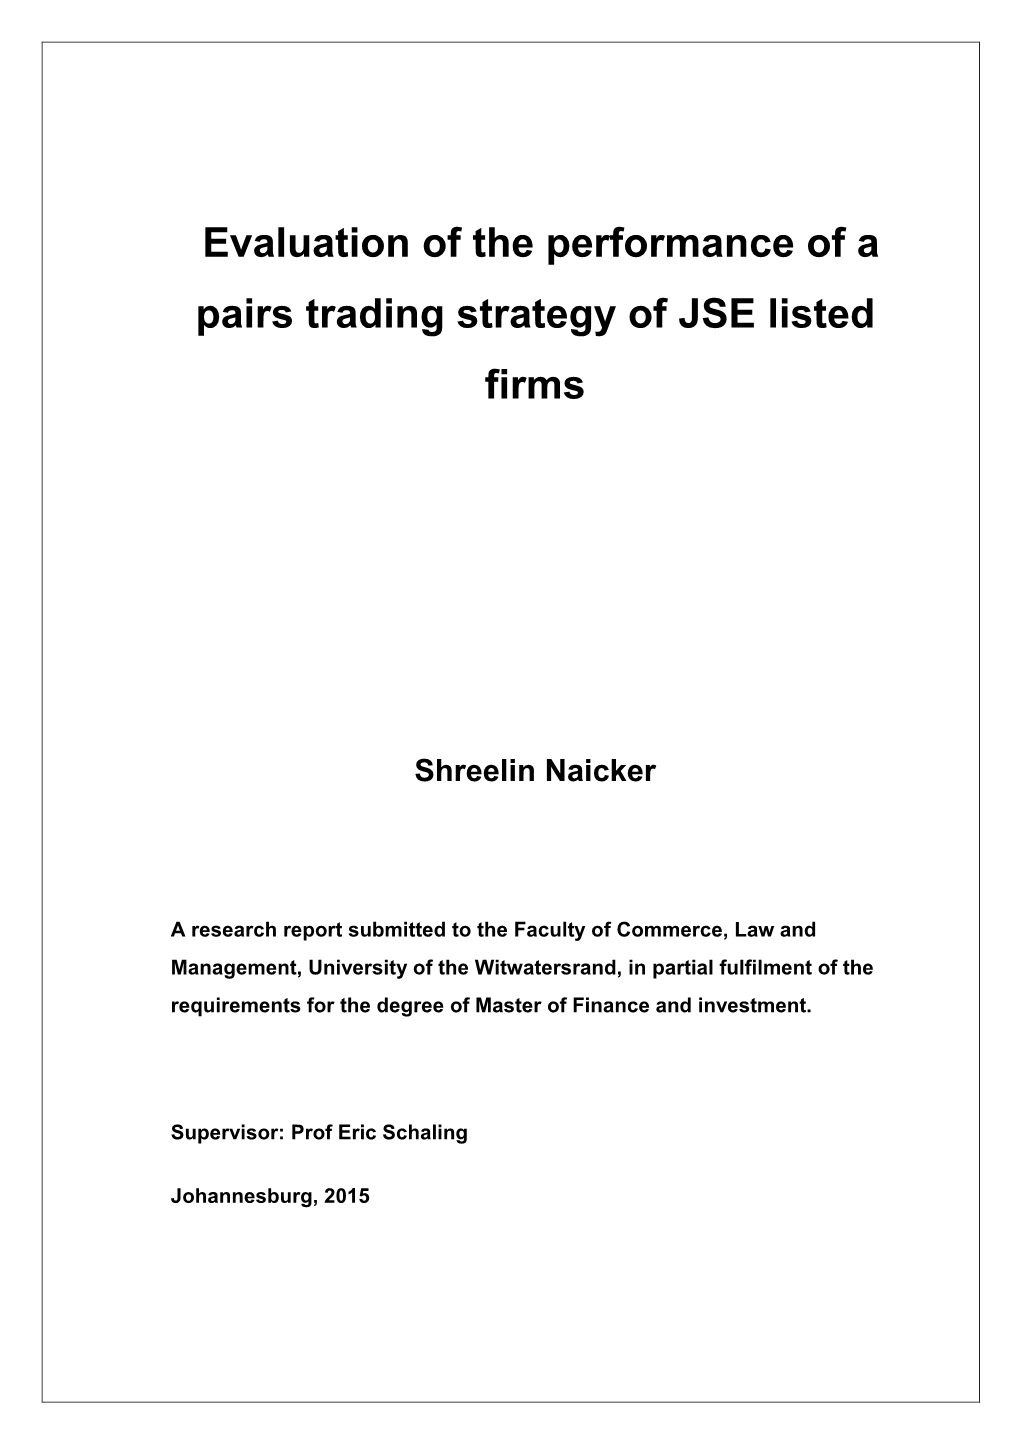 Evaluation of the Performance of a Pairs Trading Strategy of JSE Listed Firms